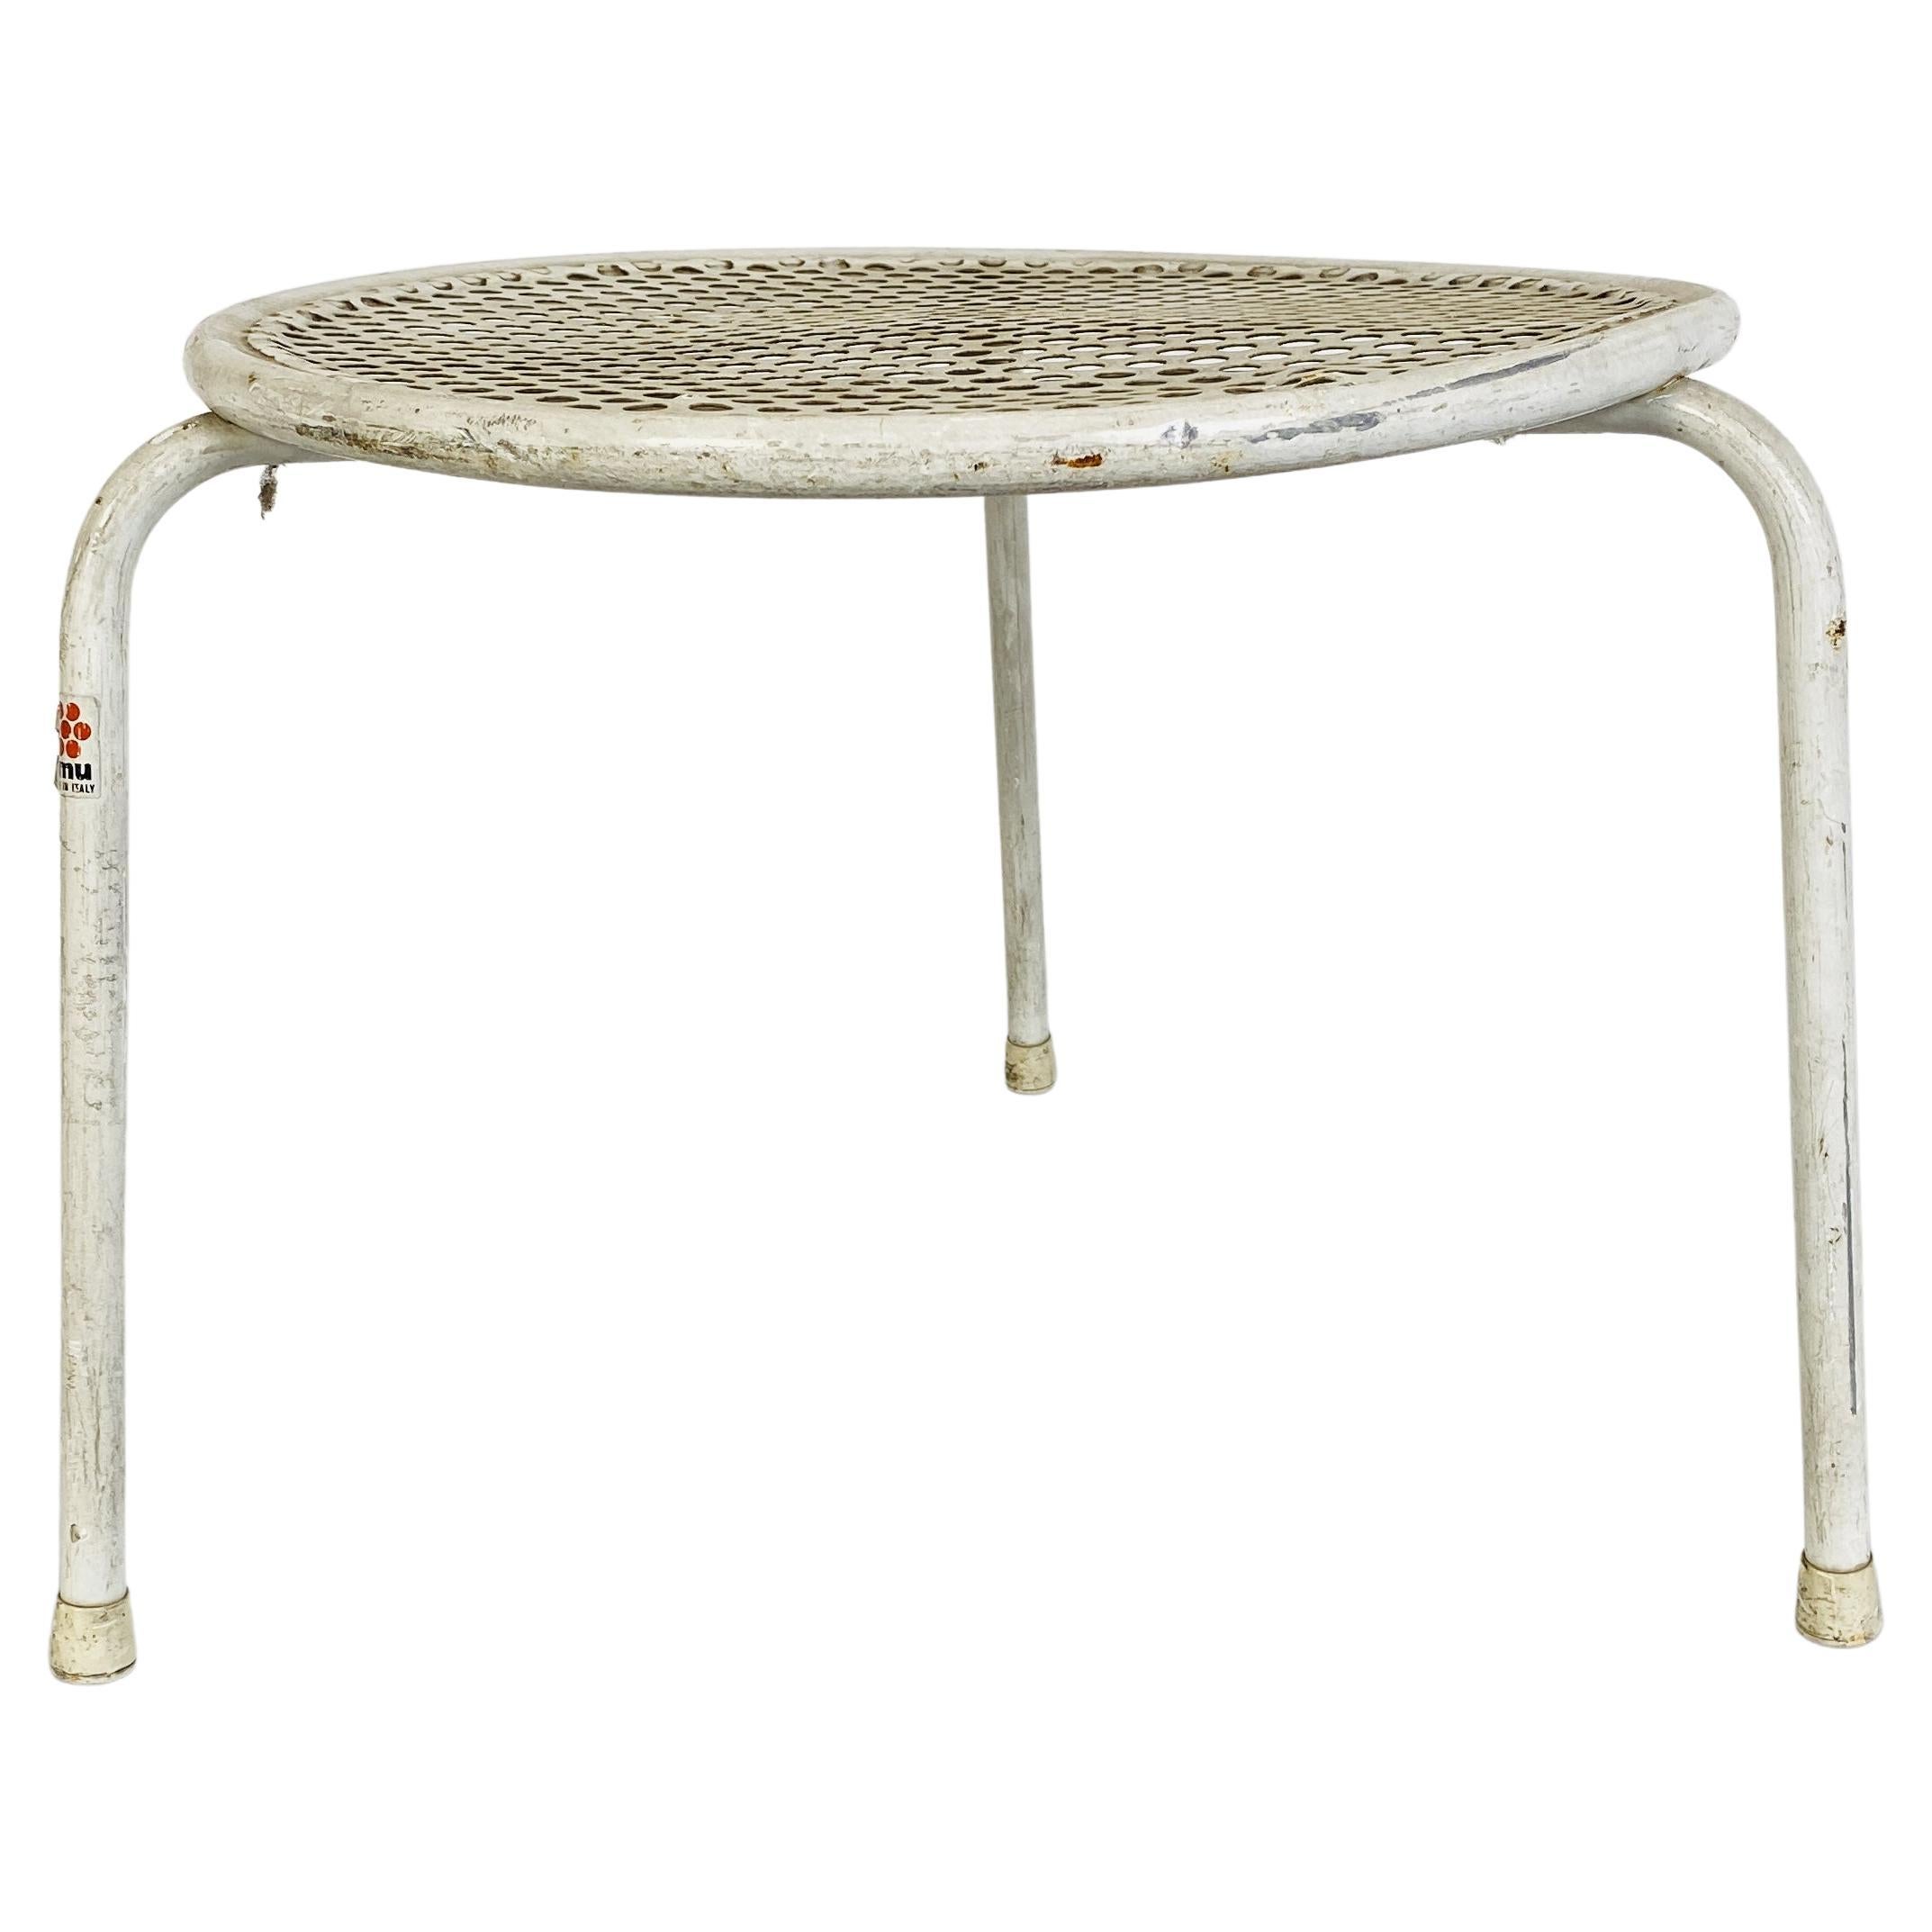 Italian Mid-Century Modern Perforated Metal Outdoor Table by Emu, 1960s For Sale